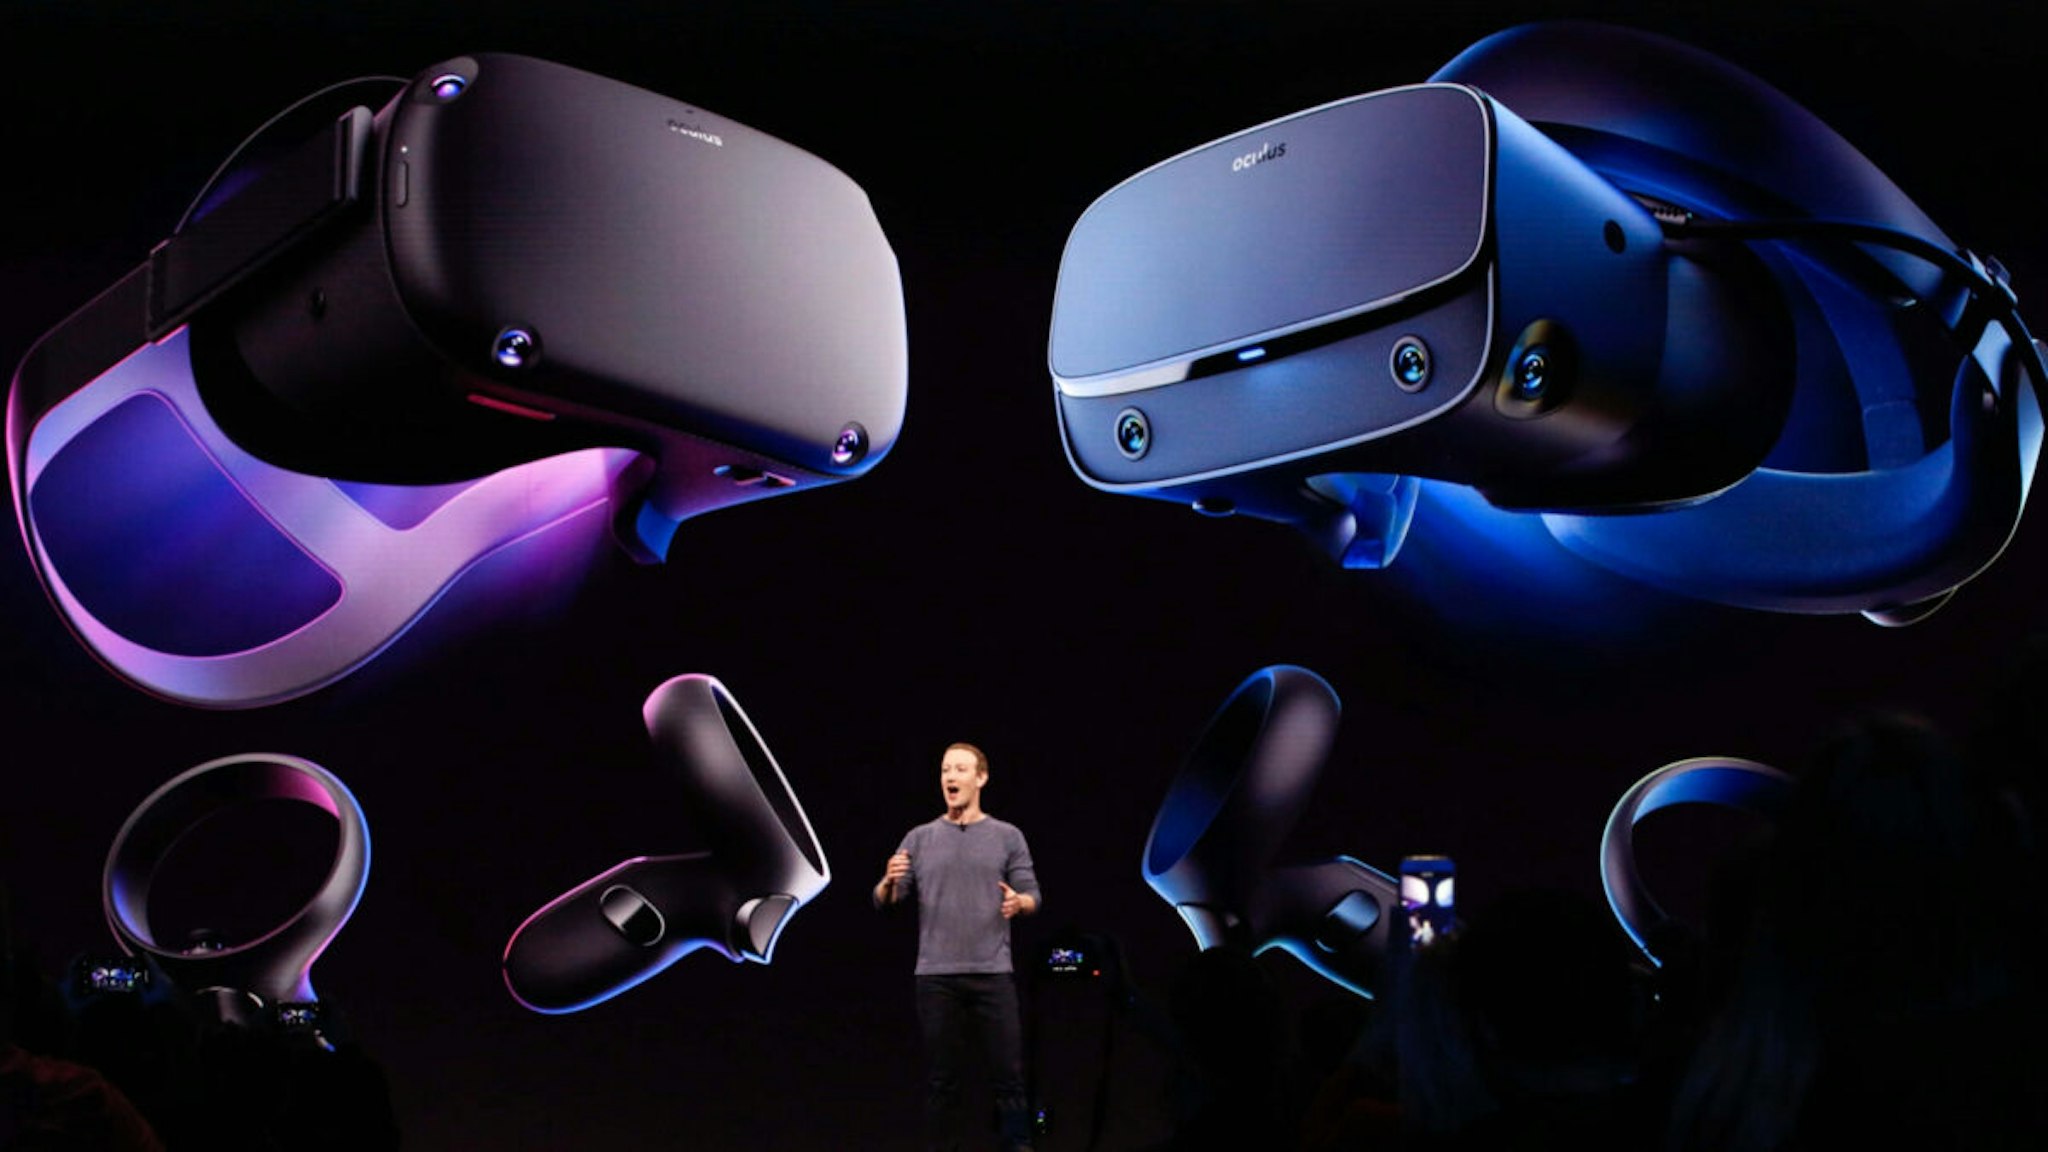 Facebook CEO Mark Zuckerberg introduces the new Oculus Quest as he delivers the opening keynote at the Facebook F8 Conference at McEnery Convention Center in San Jose, California on April 30, 2019.